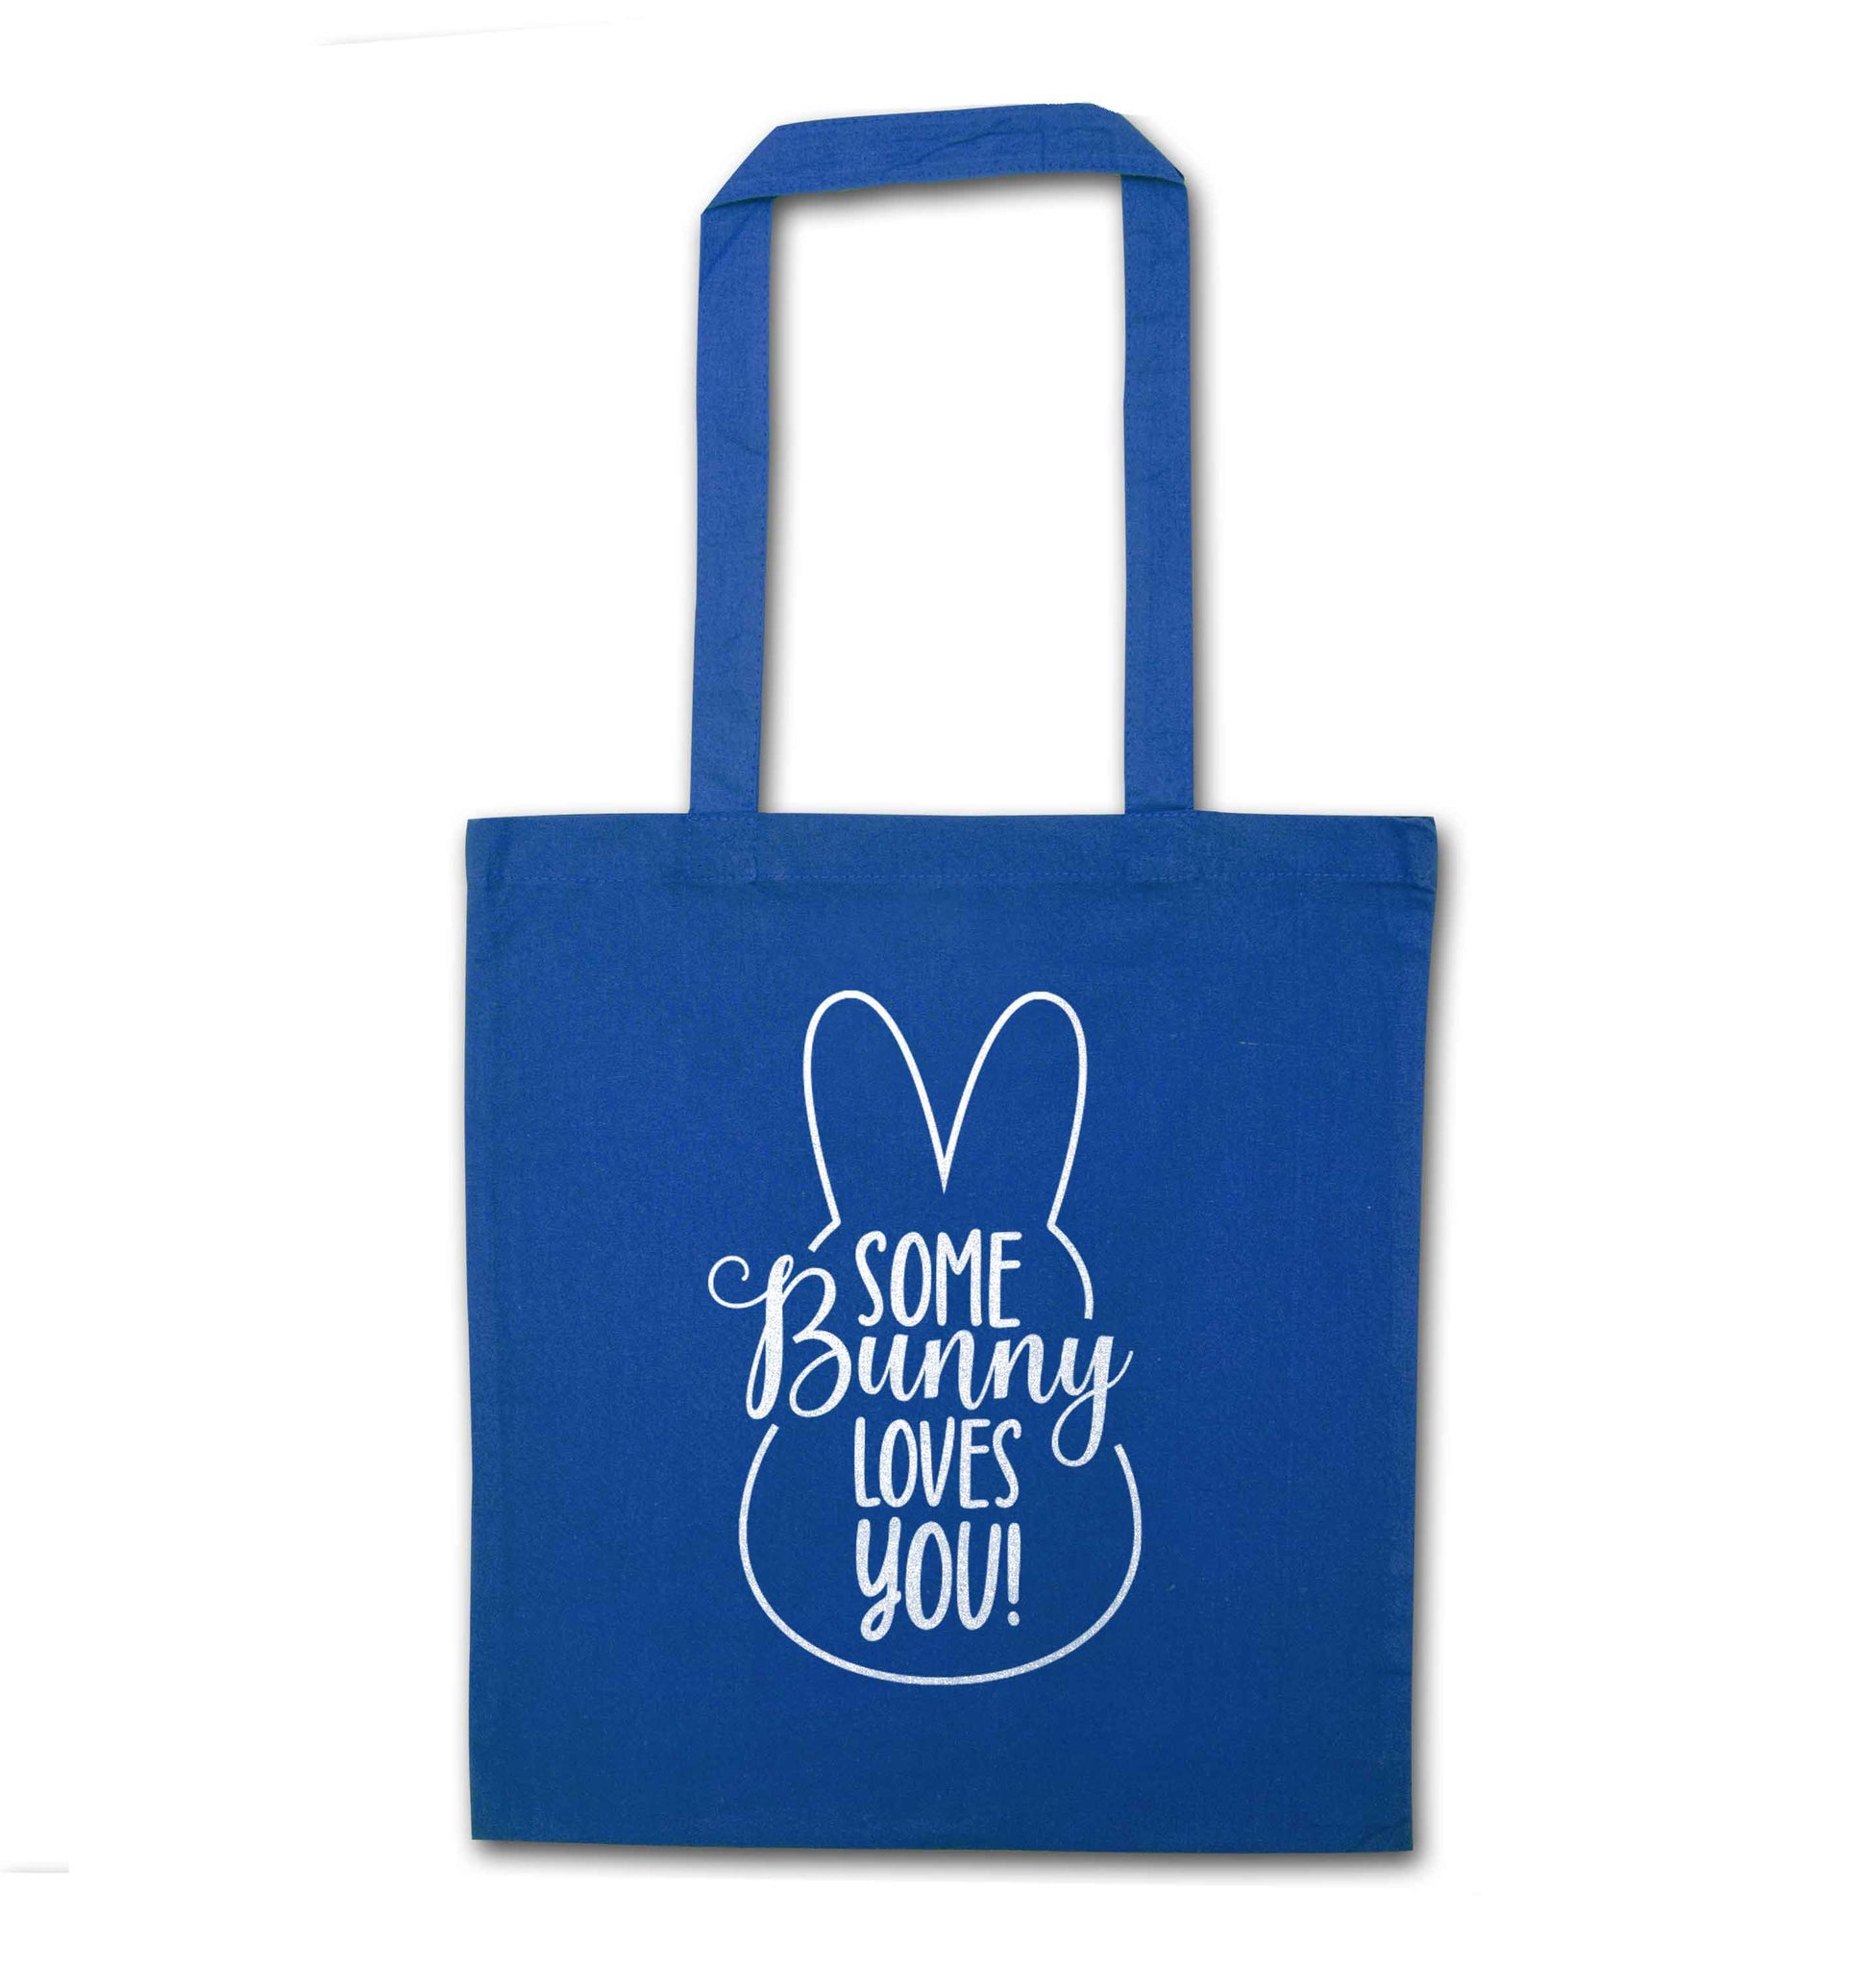 Some bunny loves you blue tote bag